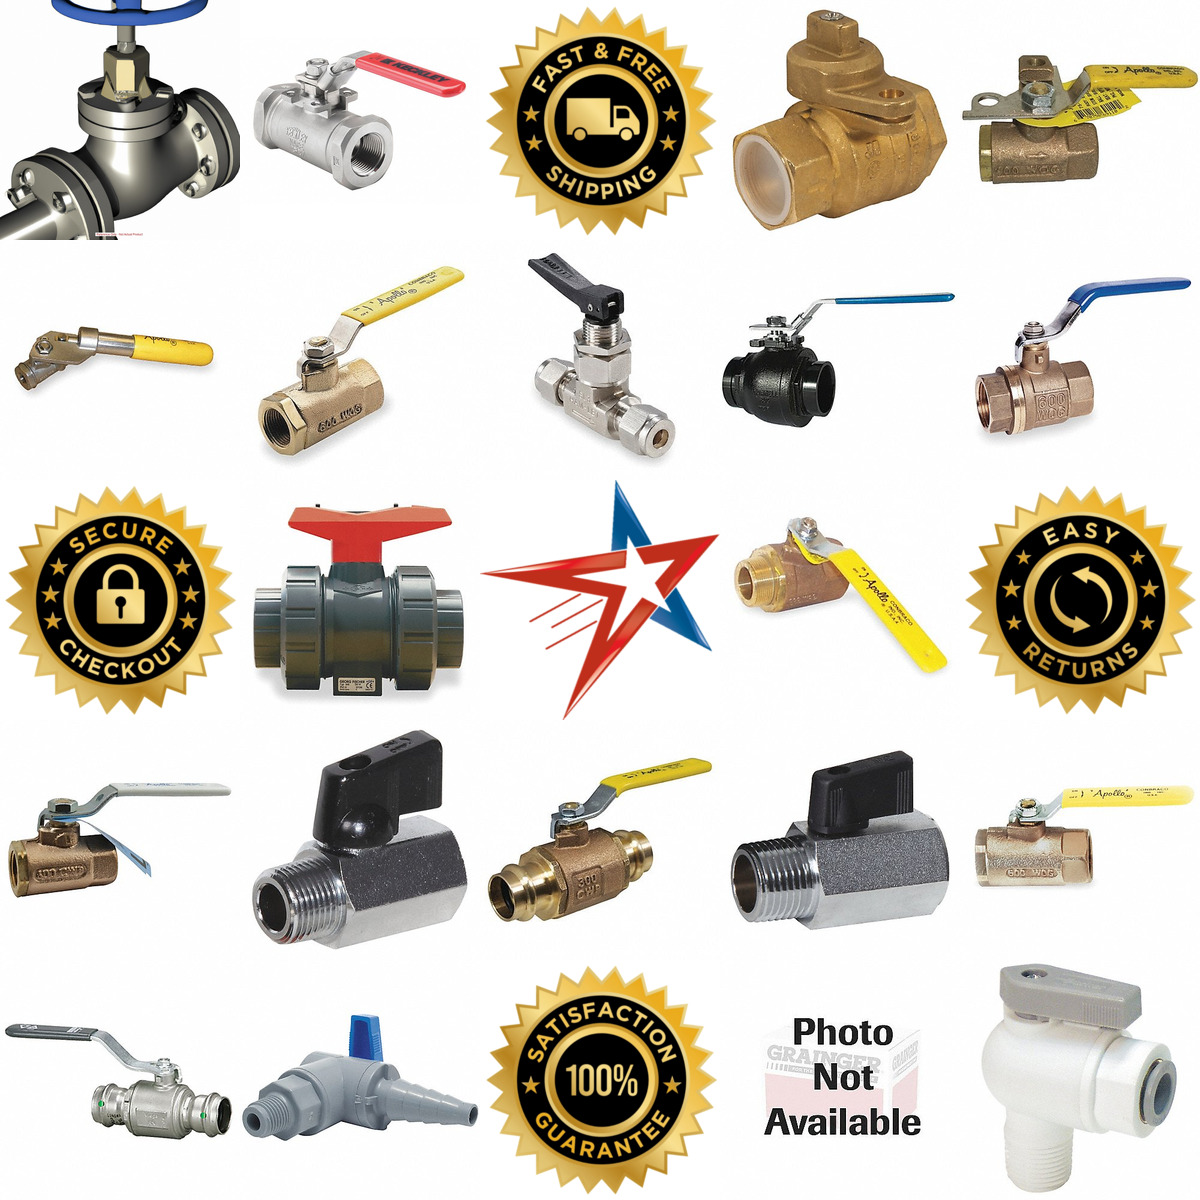 A selection of Ball Valves products on GoVets